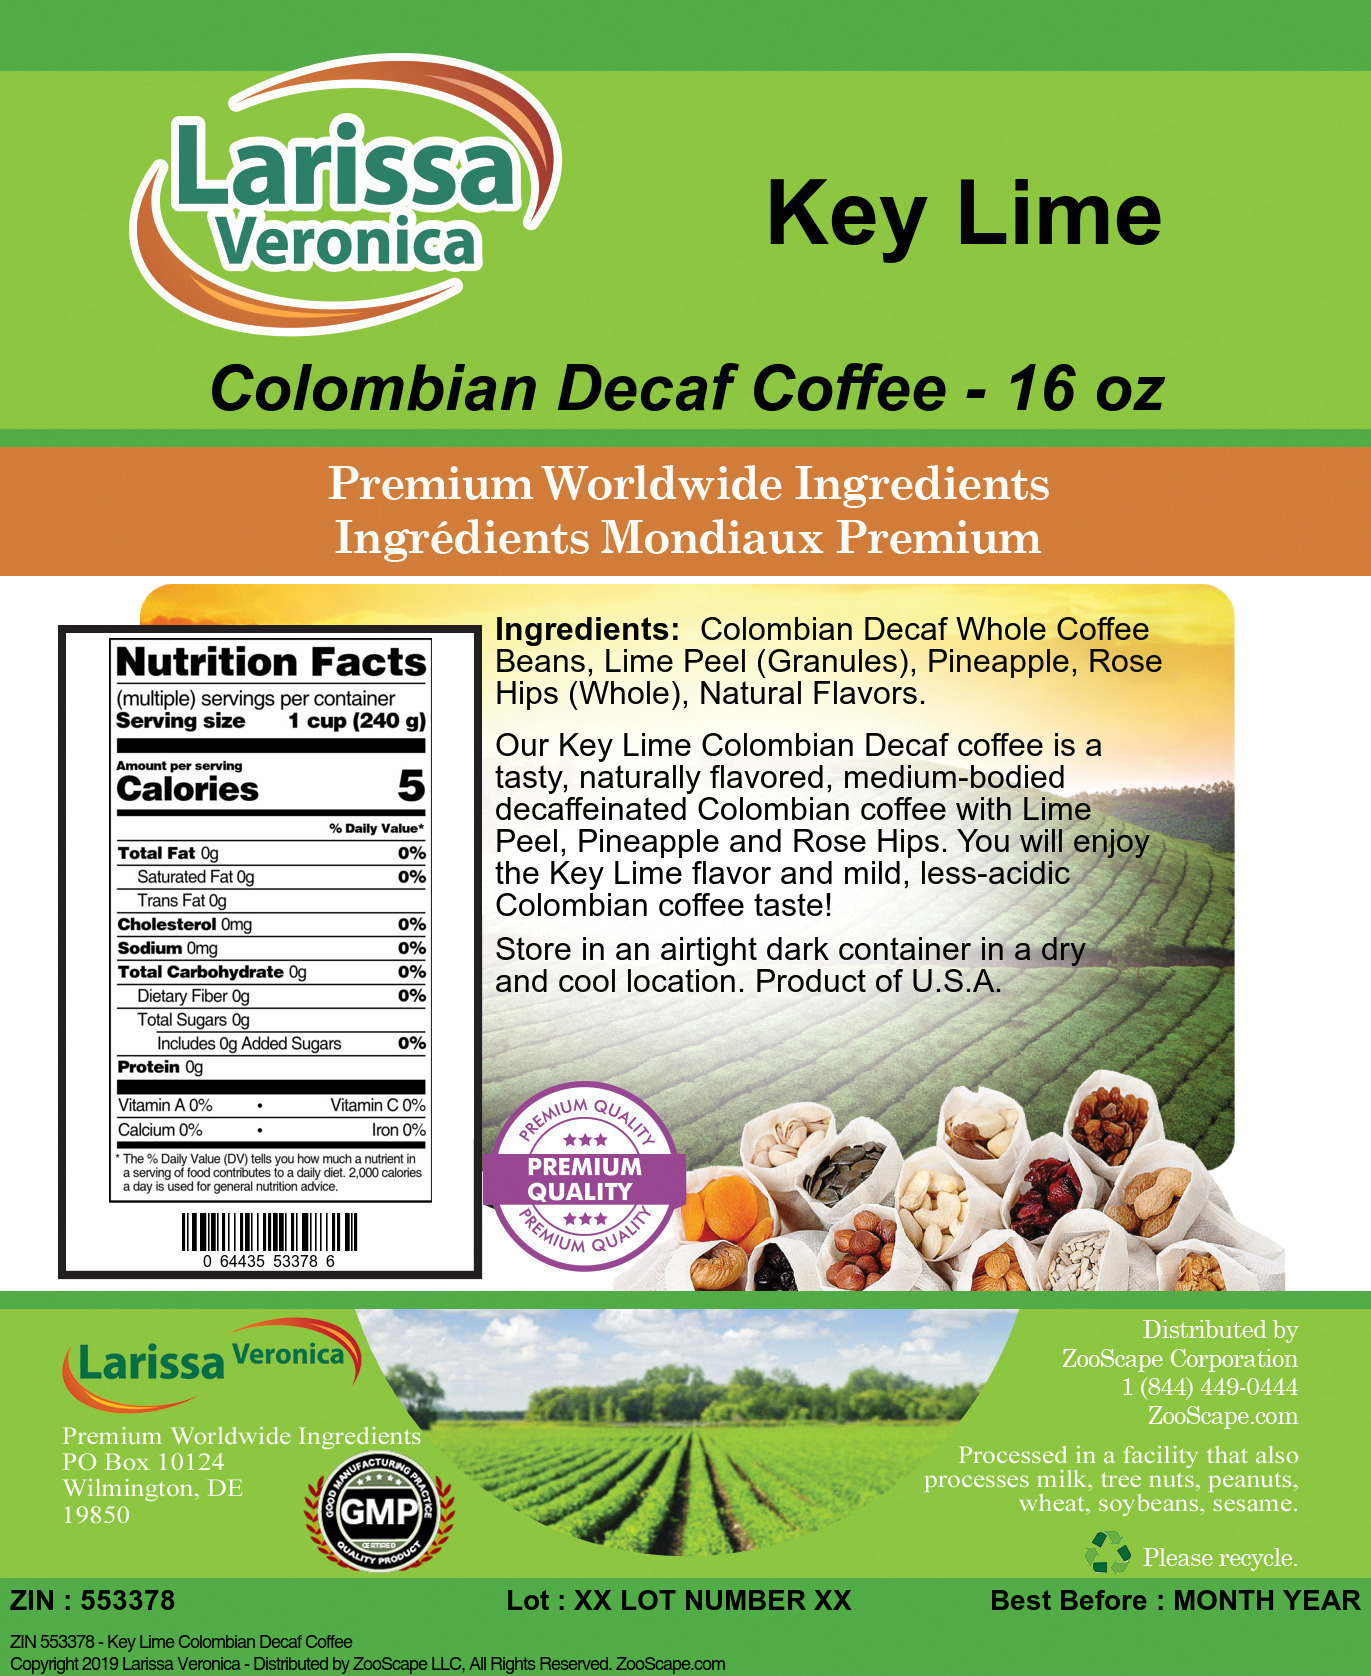 Key Lime Colombian Decaf Coffee - Label